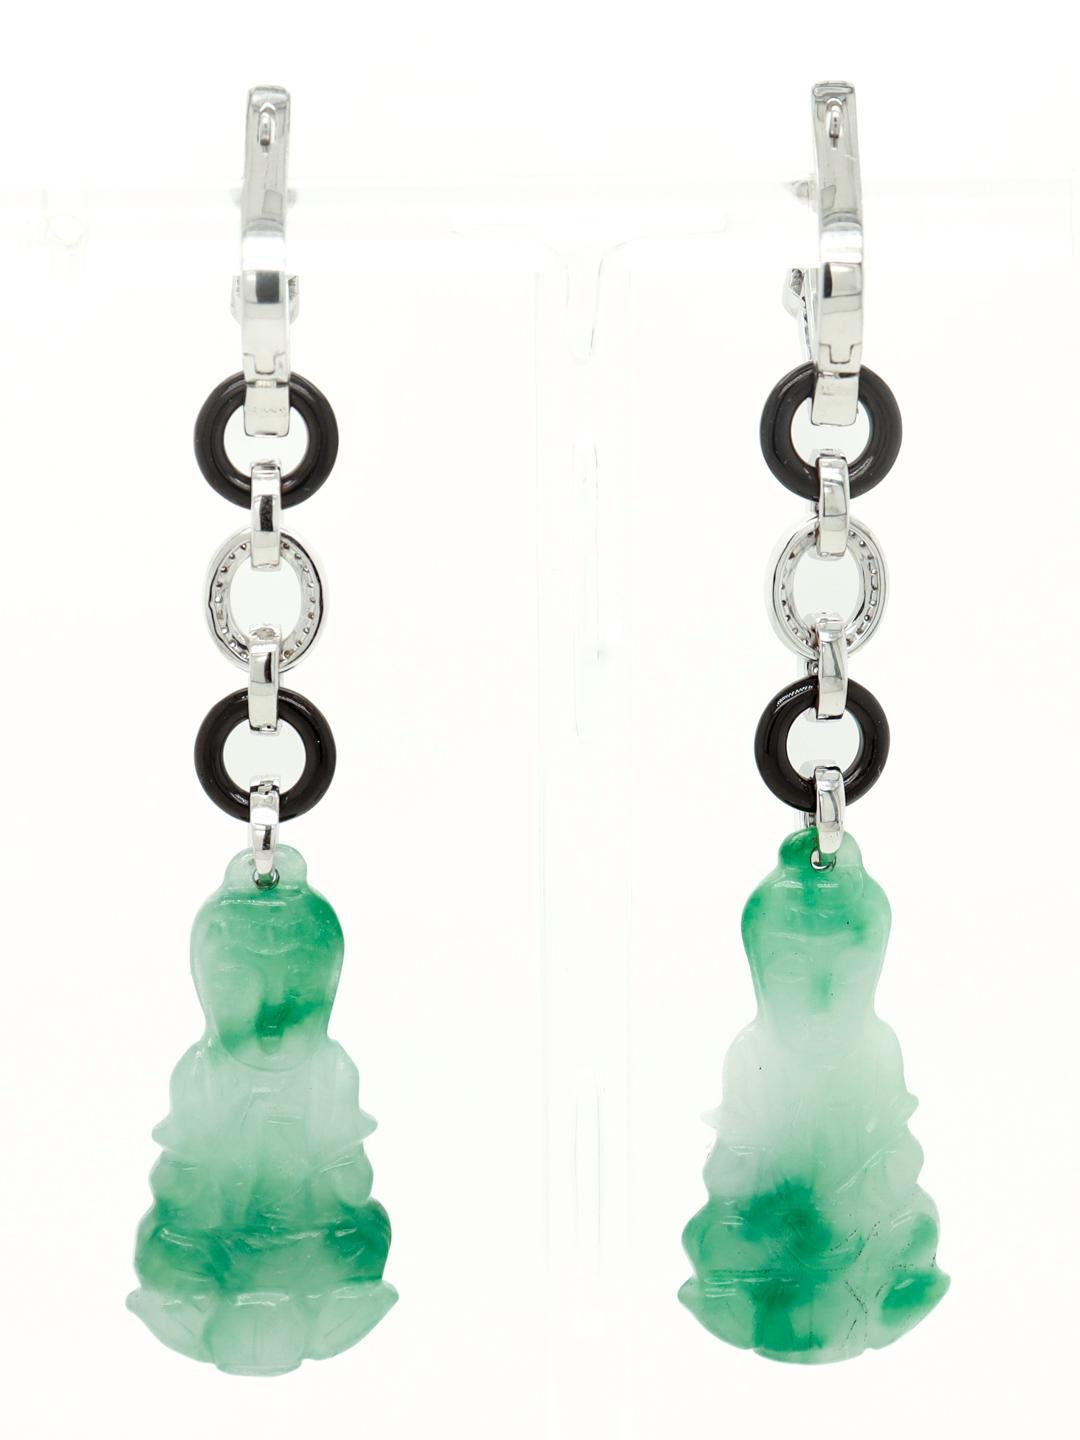 Pair of 18K Art Deco Style Jade, Onyx, Diamond, and Sapphire Dangle Earrings In Good Condition For Sale In Philadelphia, PA